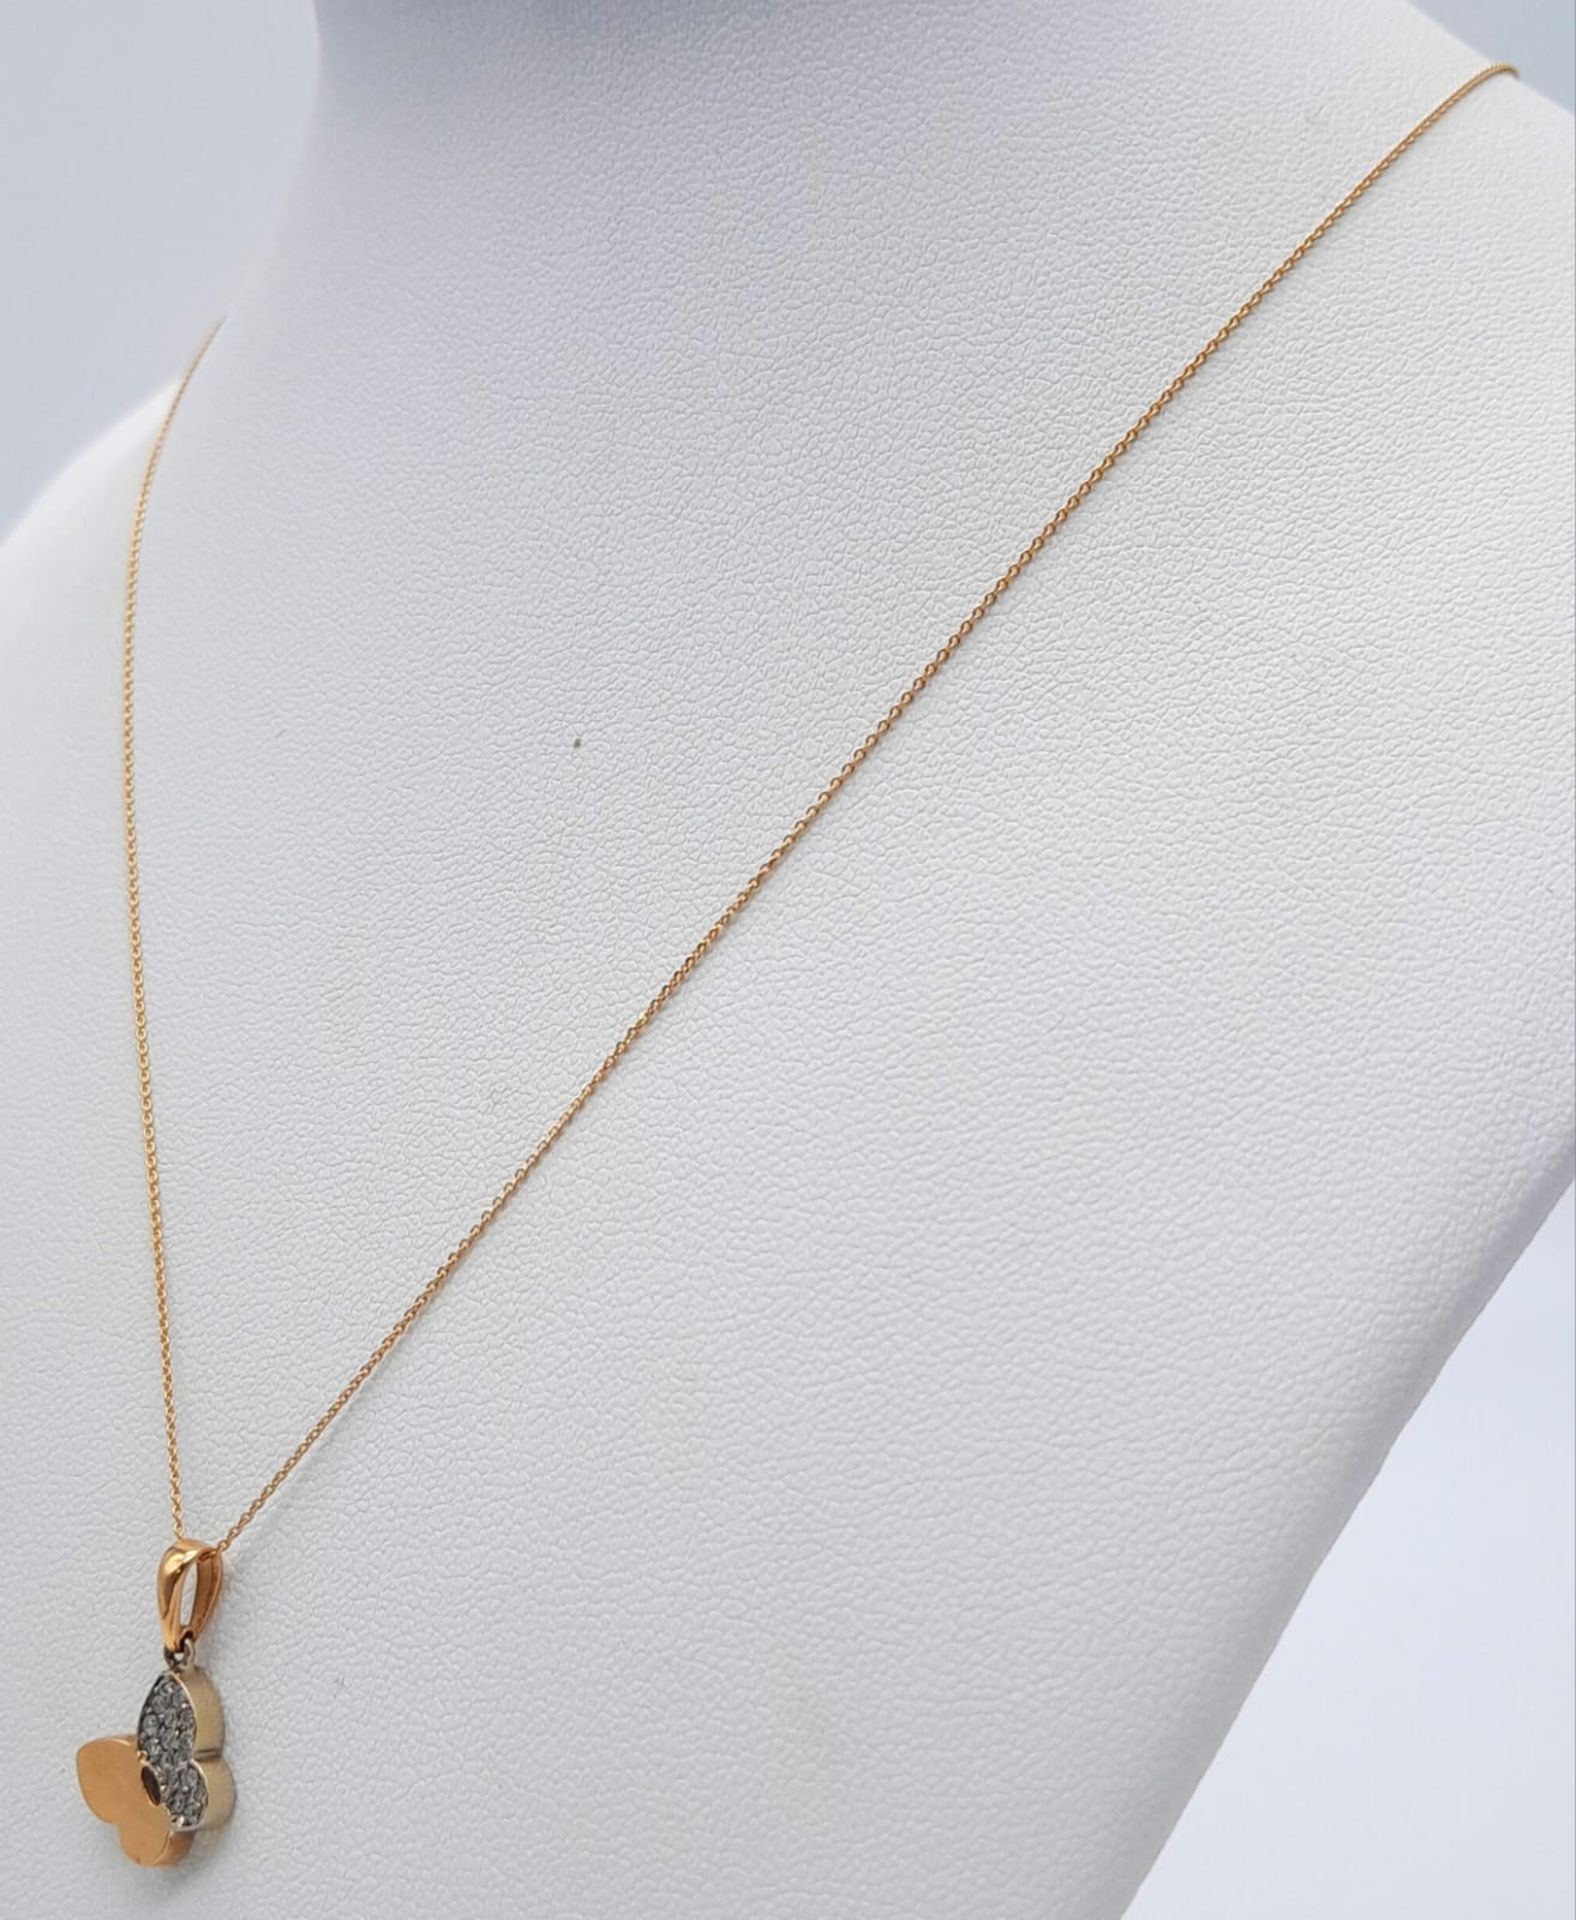 An 18K Gold Butterfly Pendant on an 18K Gold Disappearing Necklace. 2cm and 44cm. 2.4g total weight. - Image 3 of 5